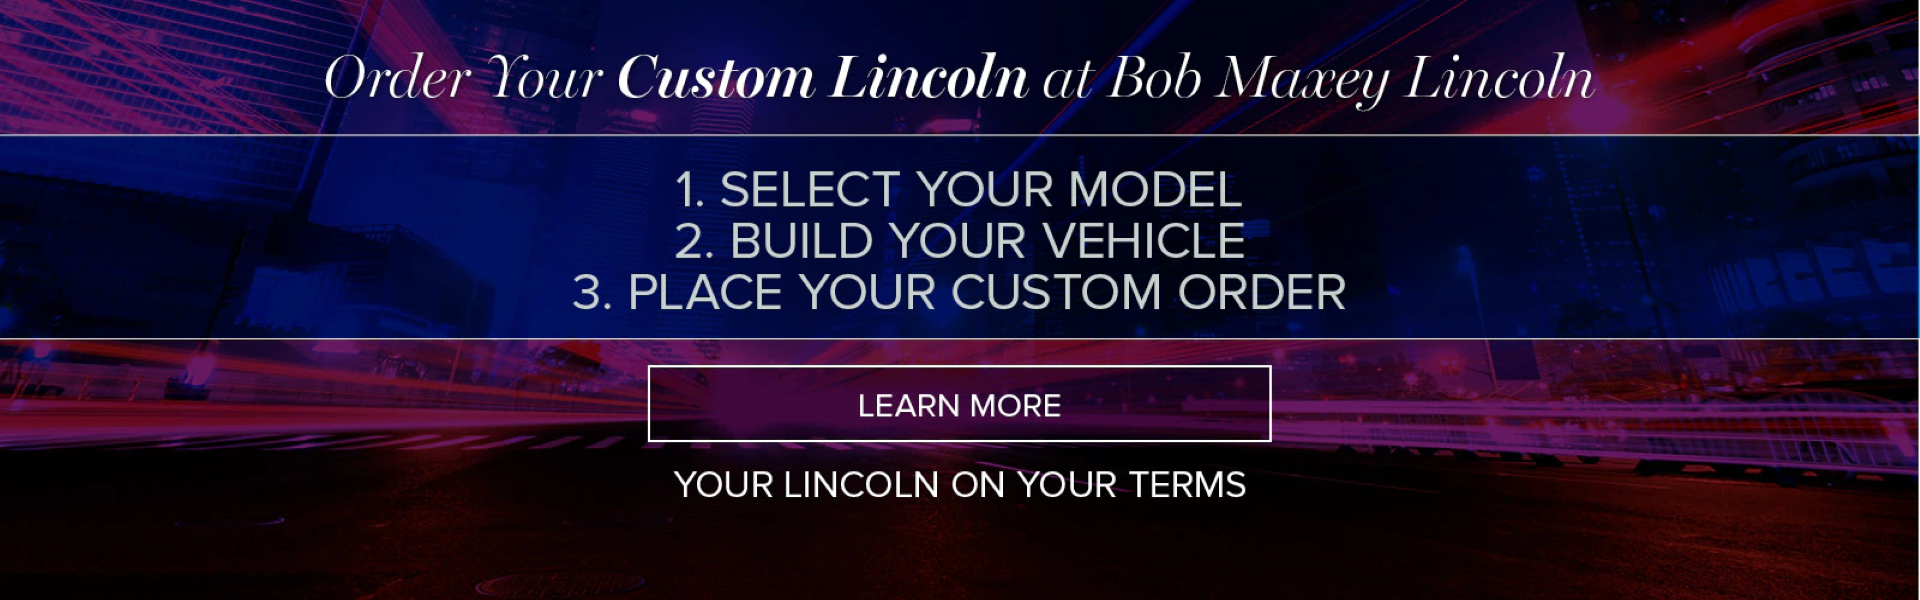 Order Your Custom Lincoln